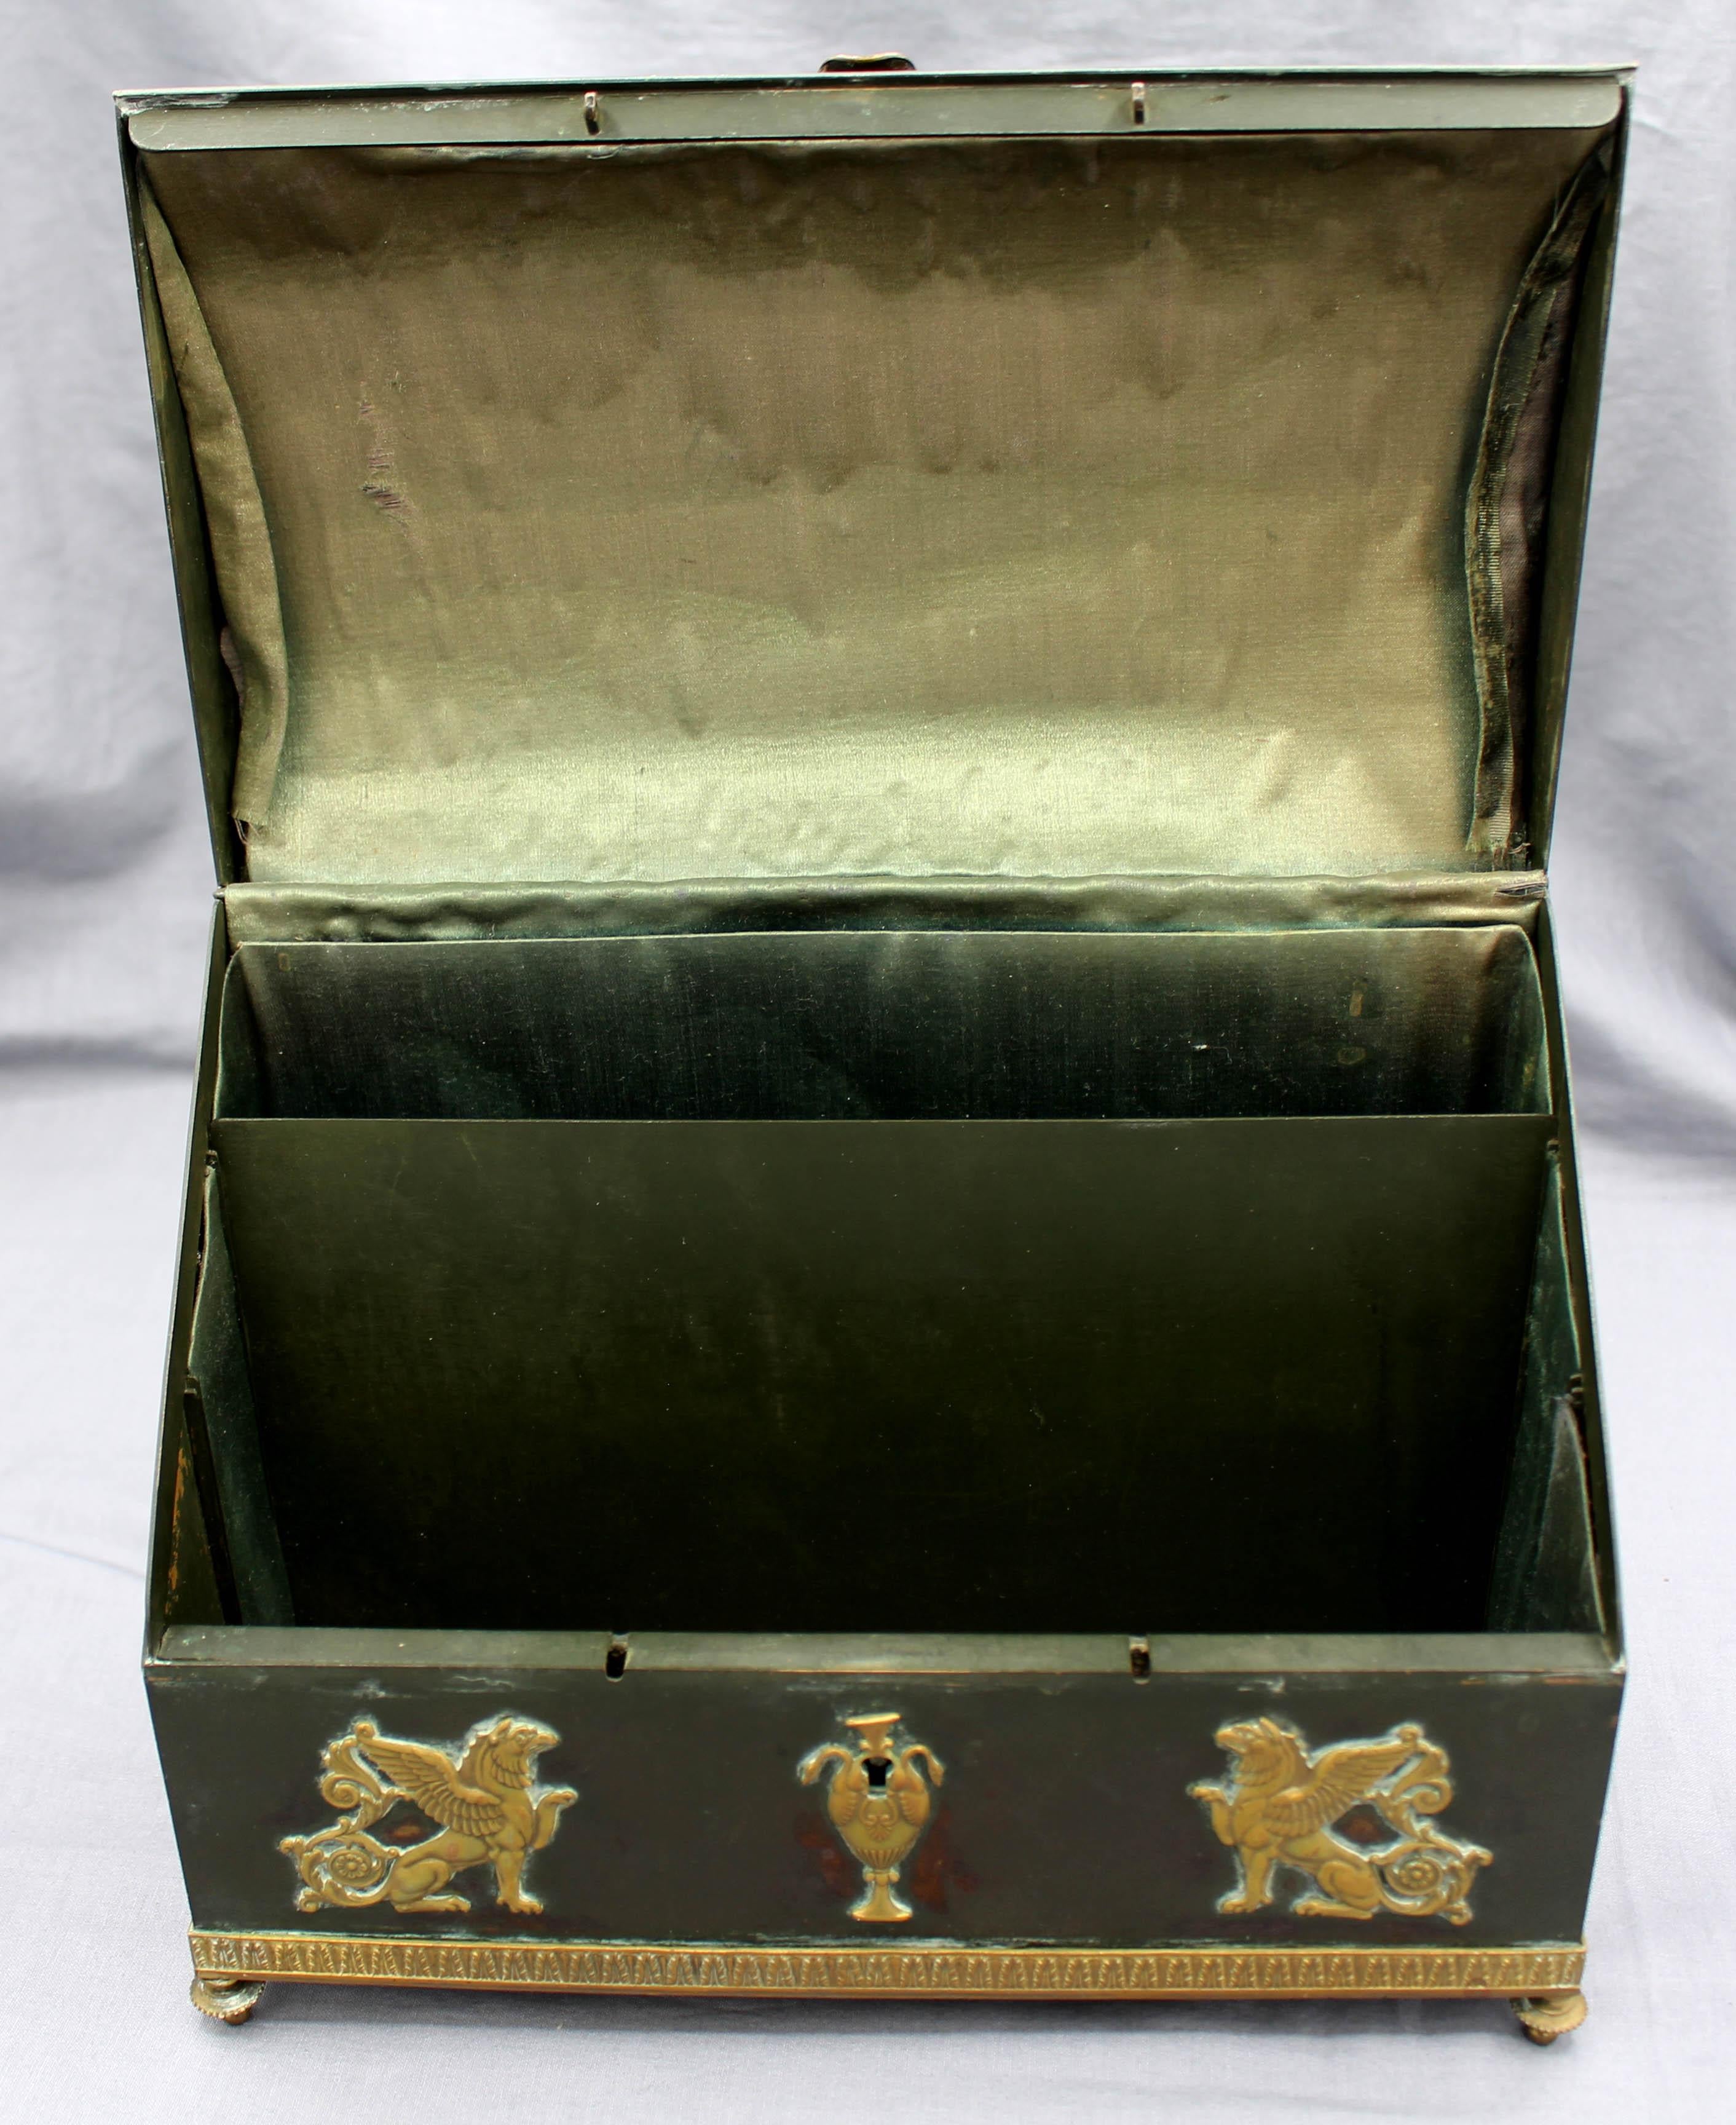 French circa 1870 bronze brass mounted letters box. Period Second Empire. Patinated bronze with superb quality brass Egyptian & Greco-Roman motif mounts, raised on troupe feet. Mounts lifting slightly on the sides.
9